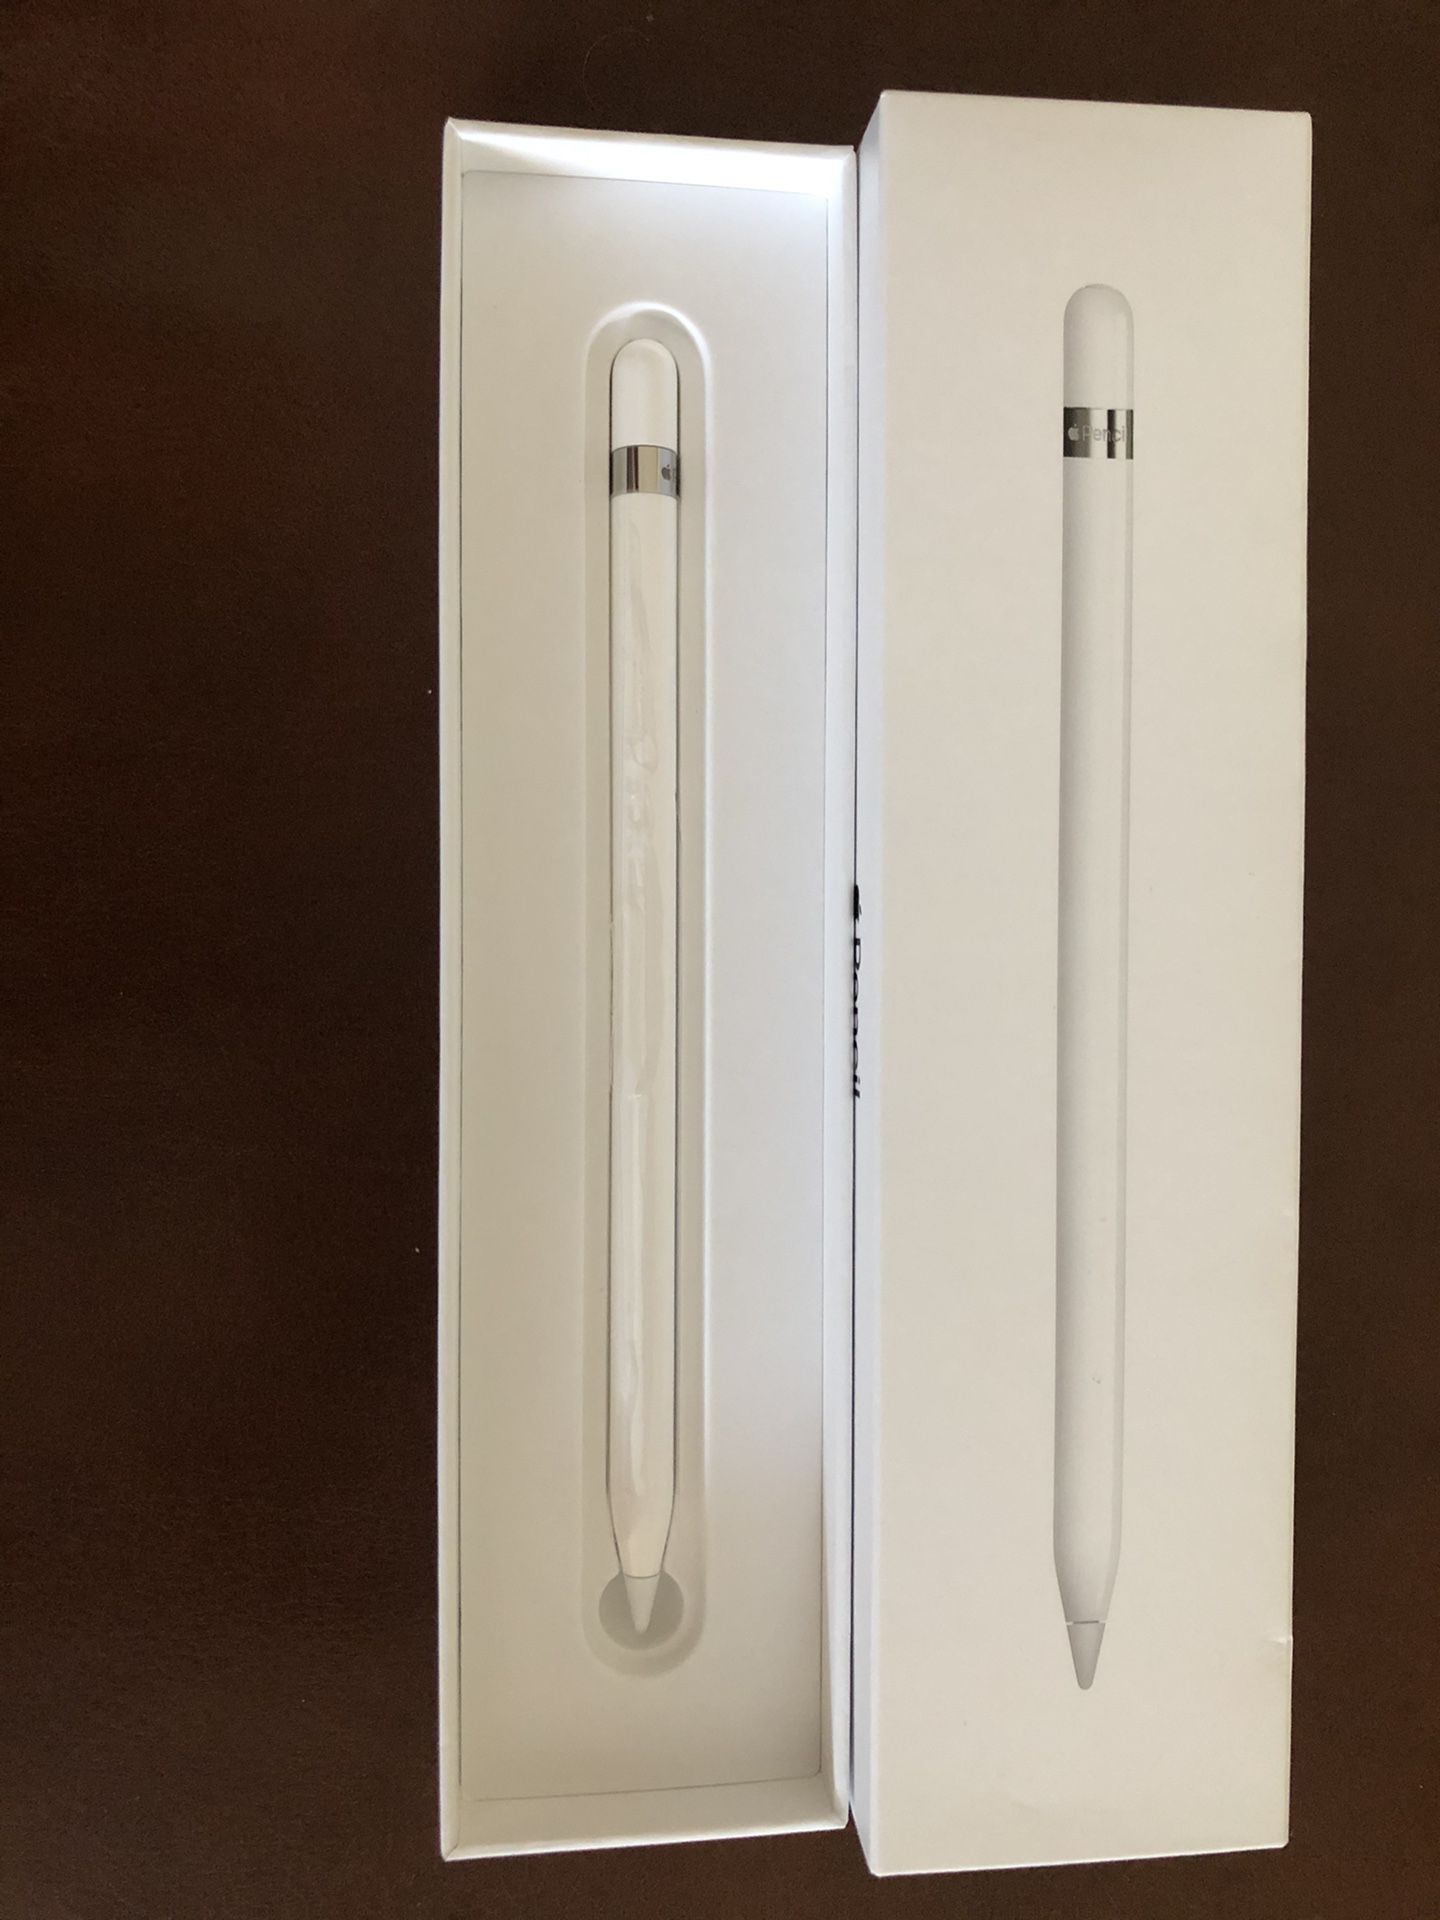 apple pencil 1st generation never used